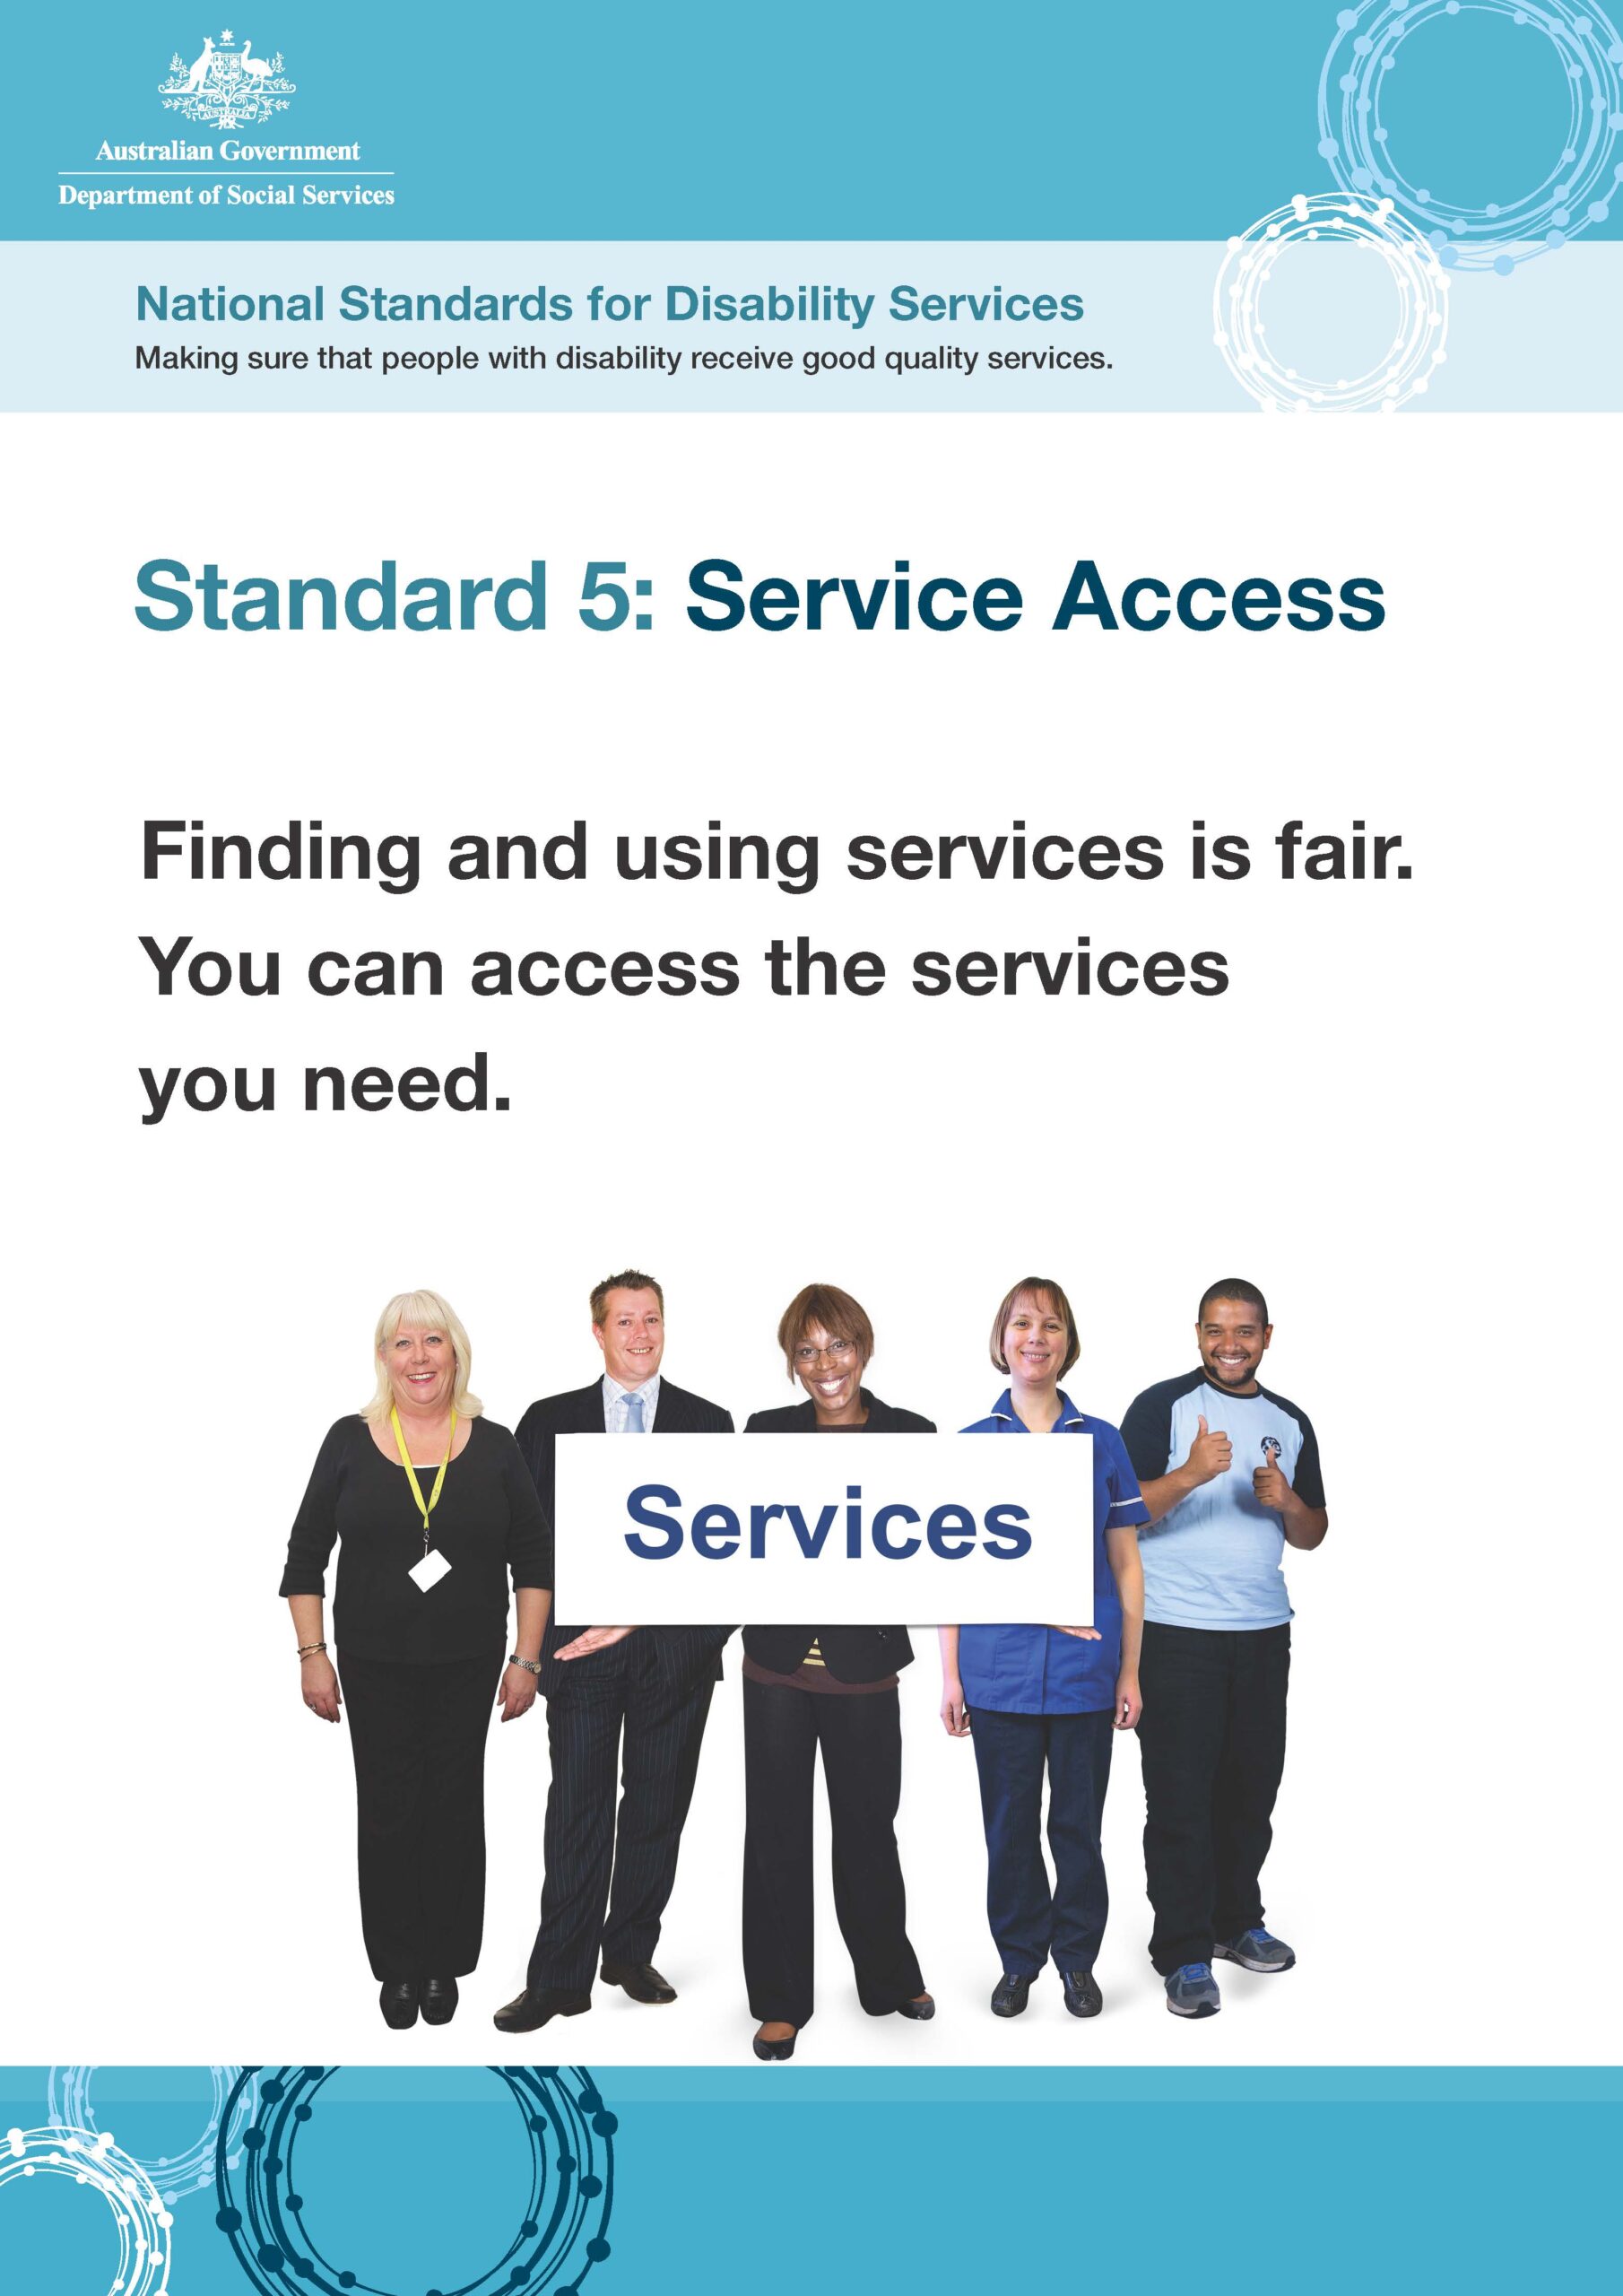 Information and access to our services are accessible, inclusive and culturally aware.